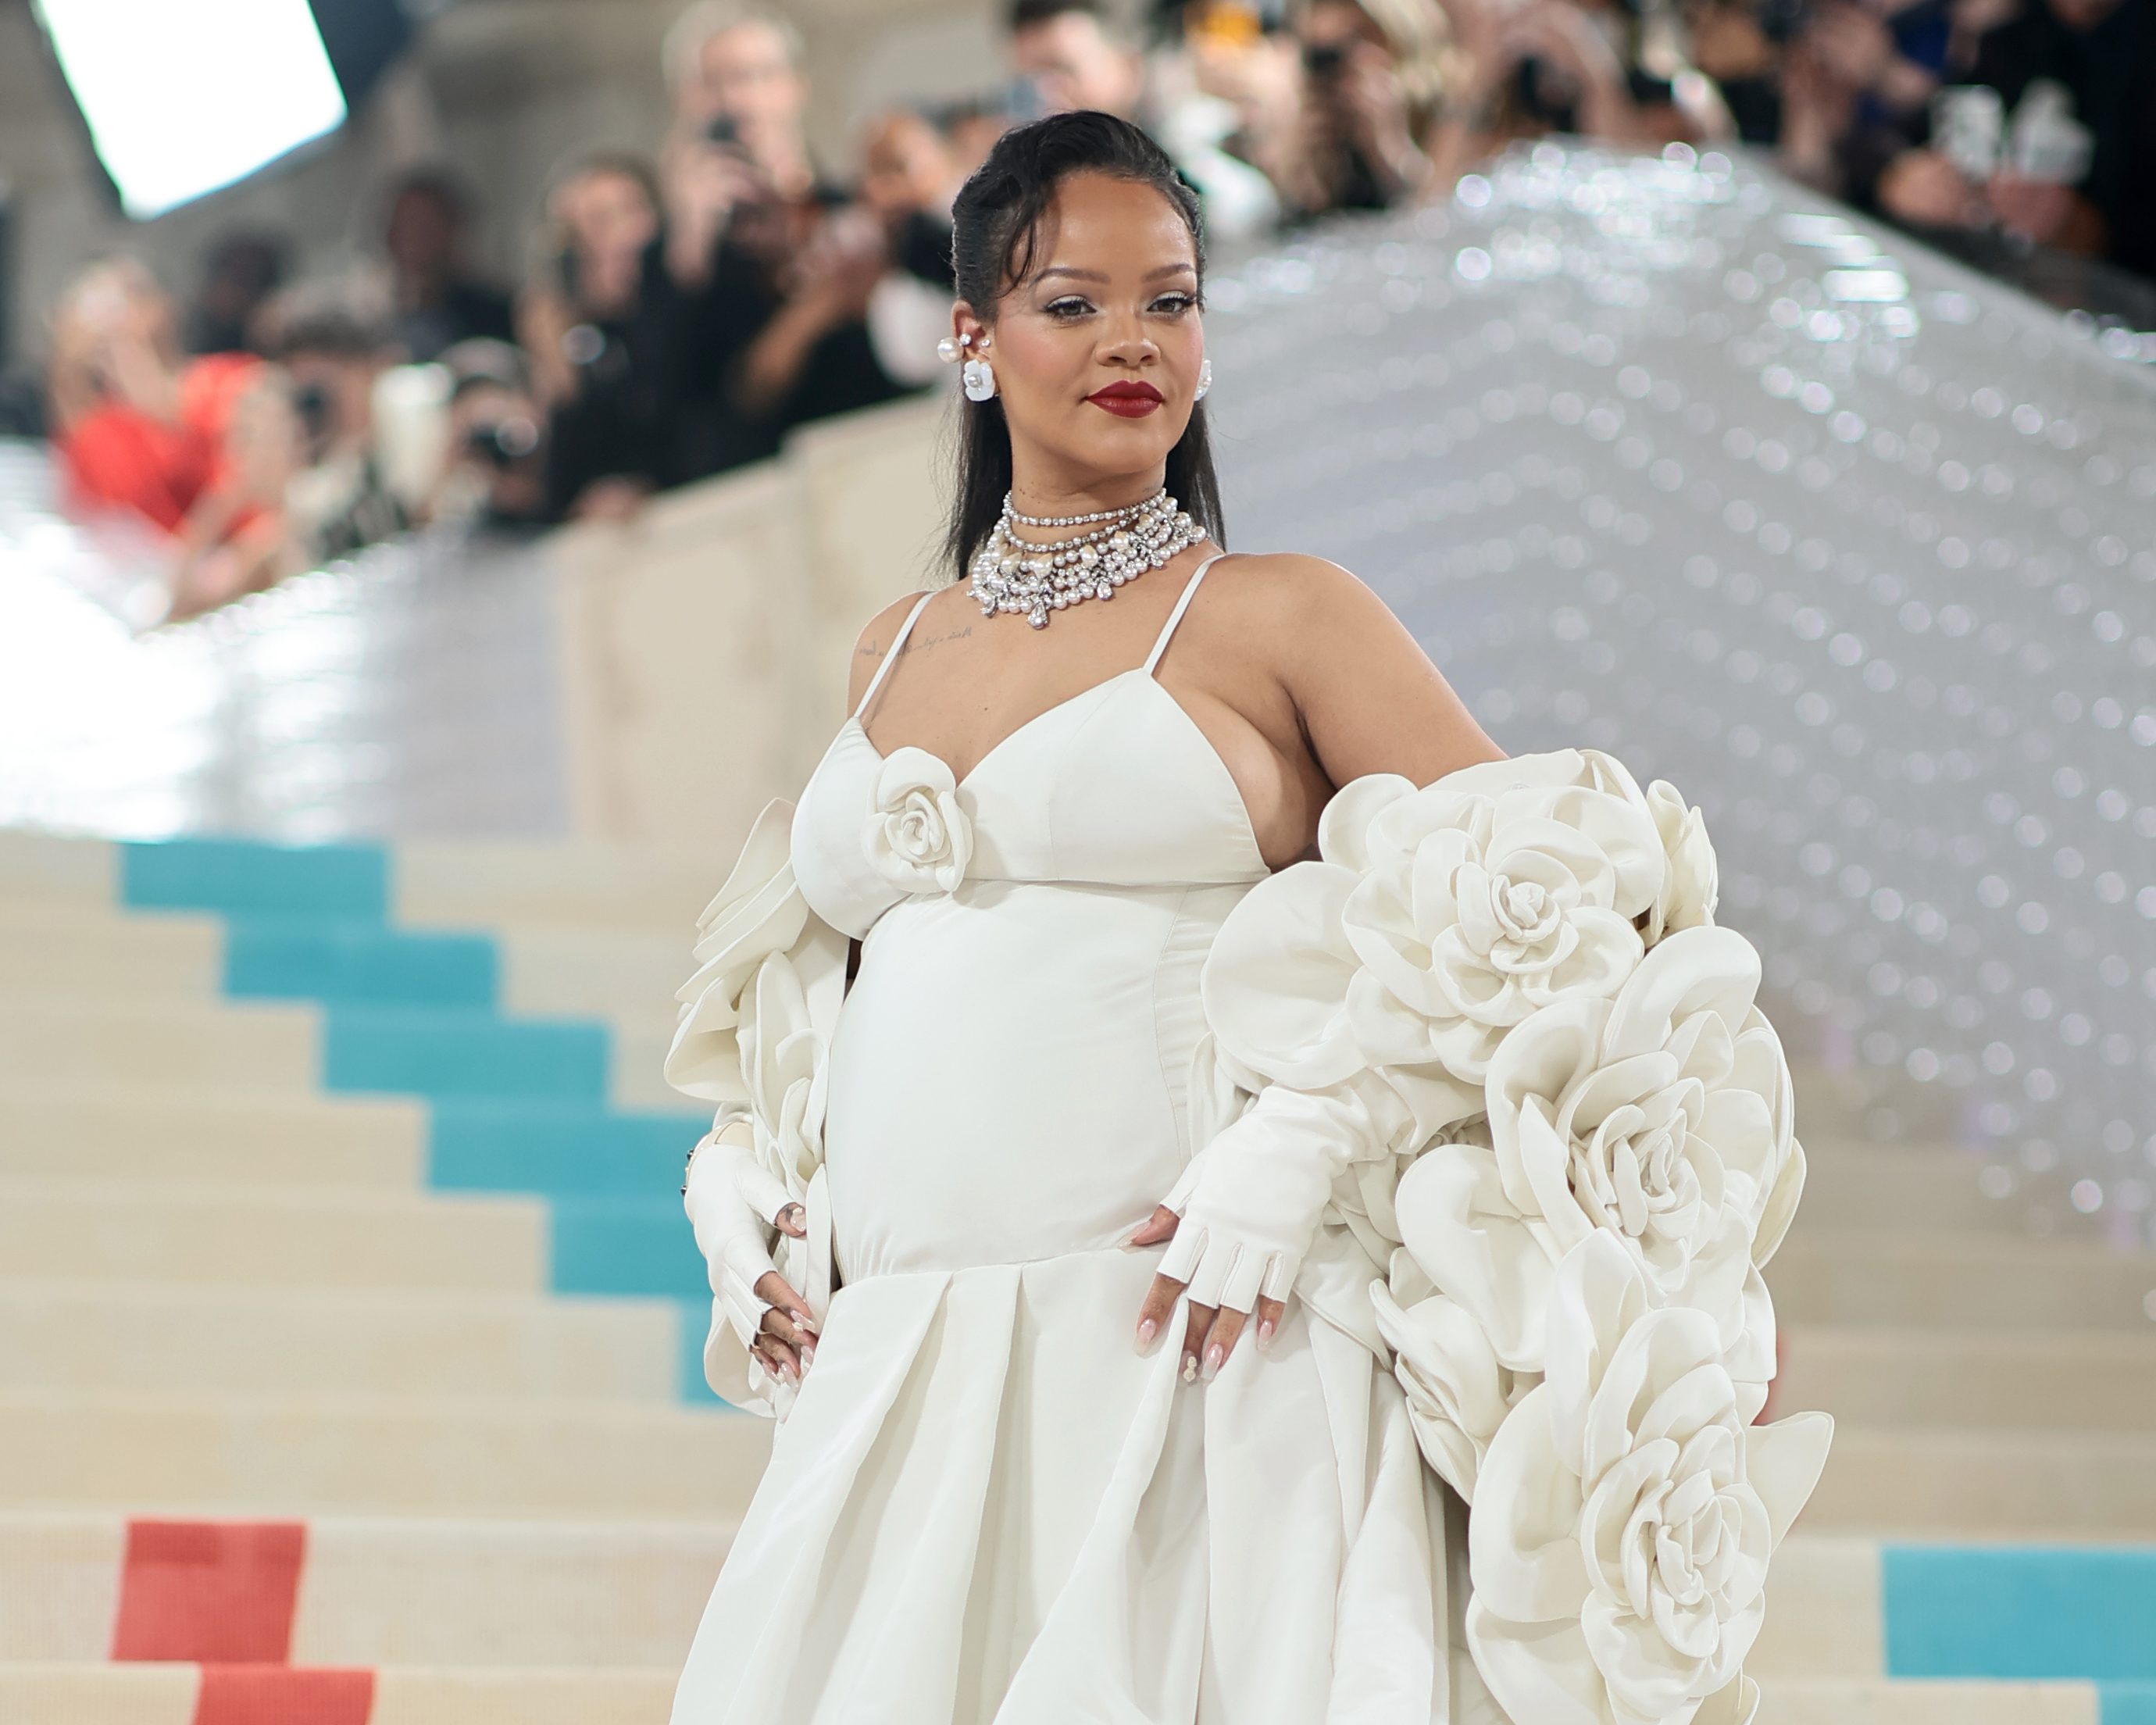 Rihanna at The 2023 Met Gala on May 1, 2023, in New York City. | Source: Getty Images